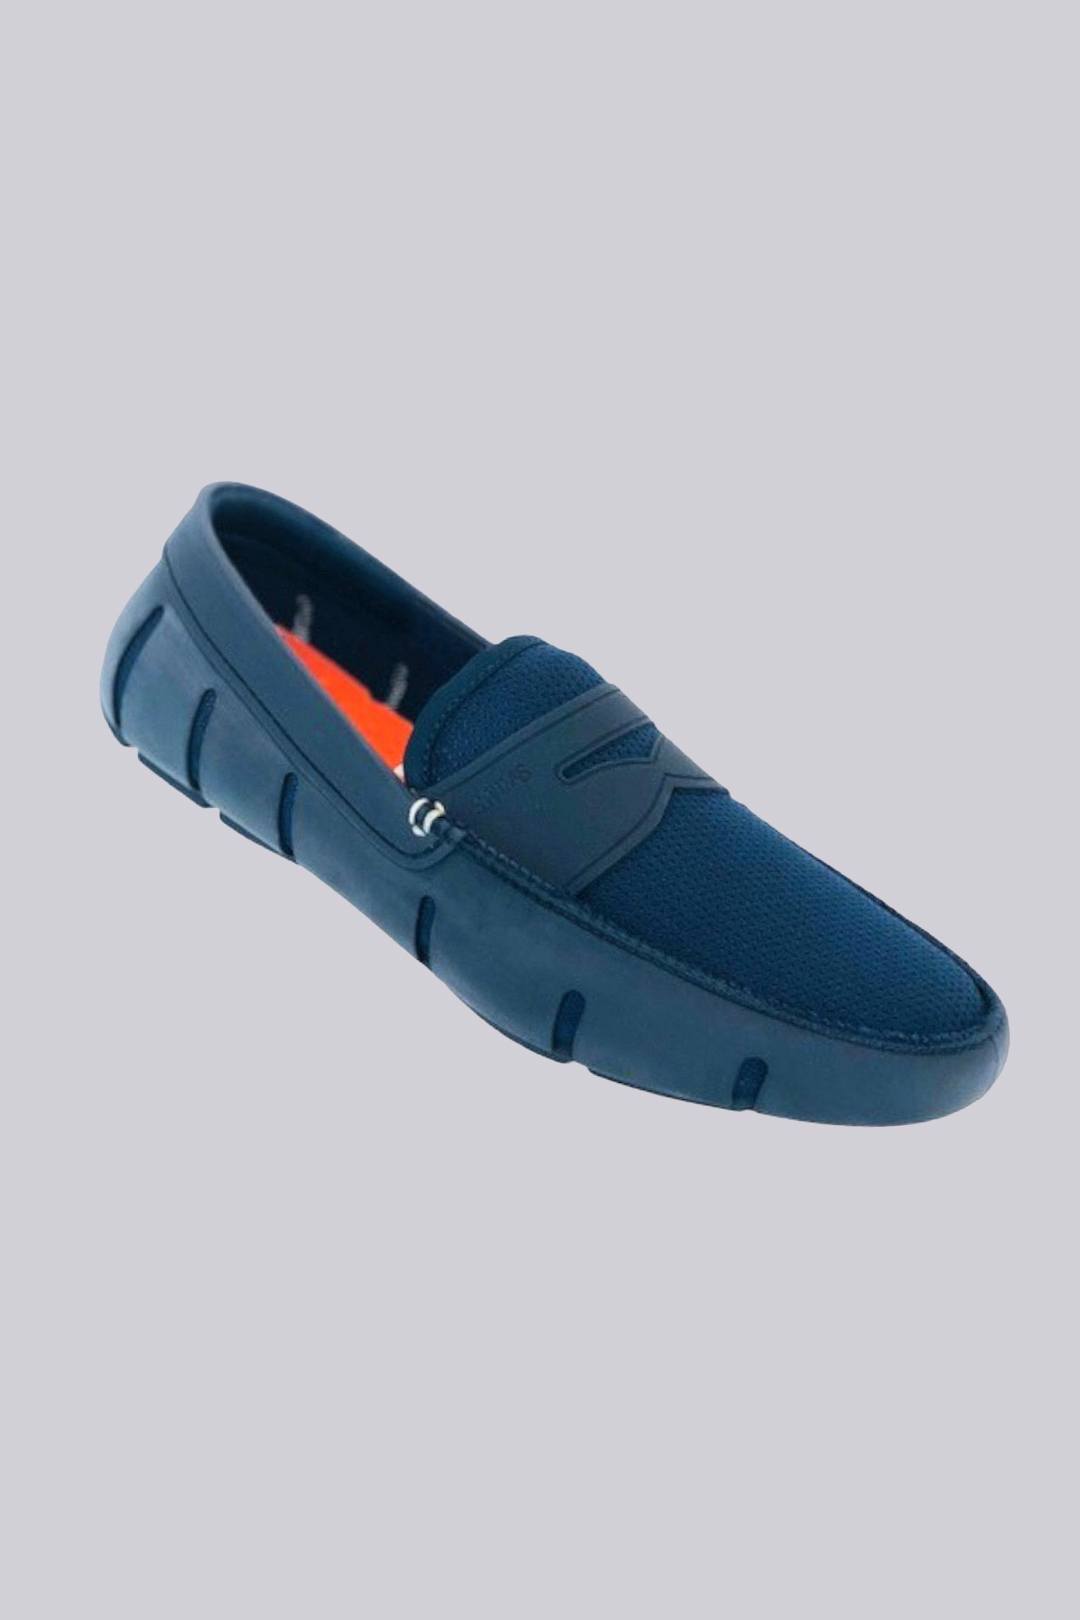 Swims Loafer